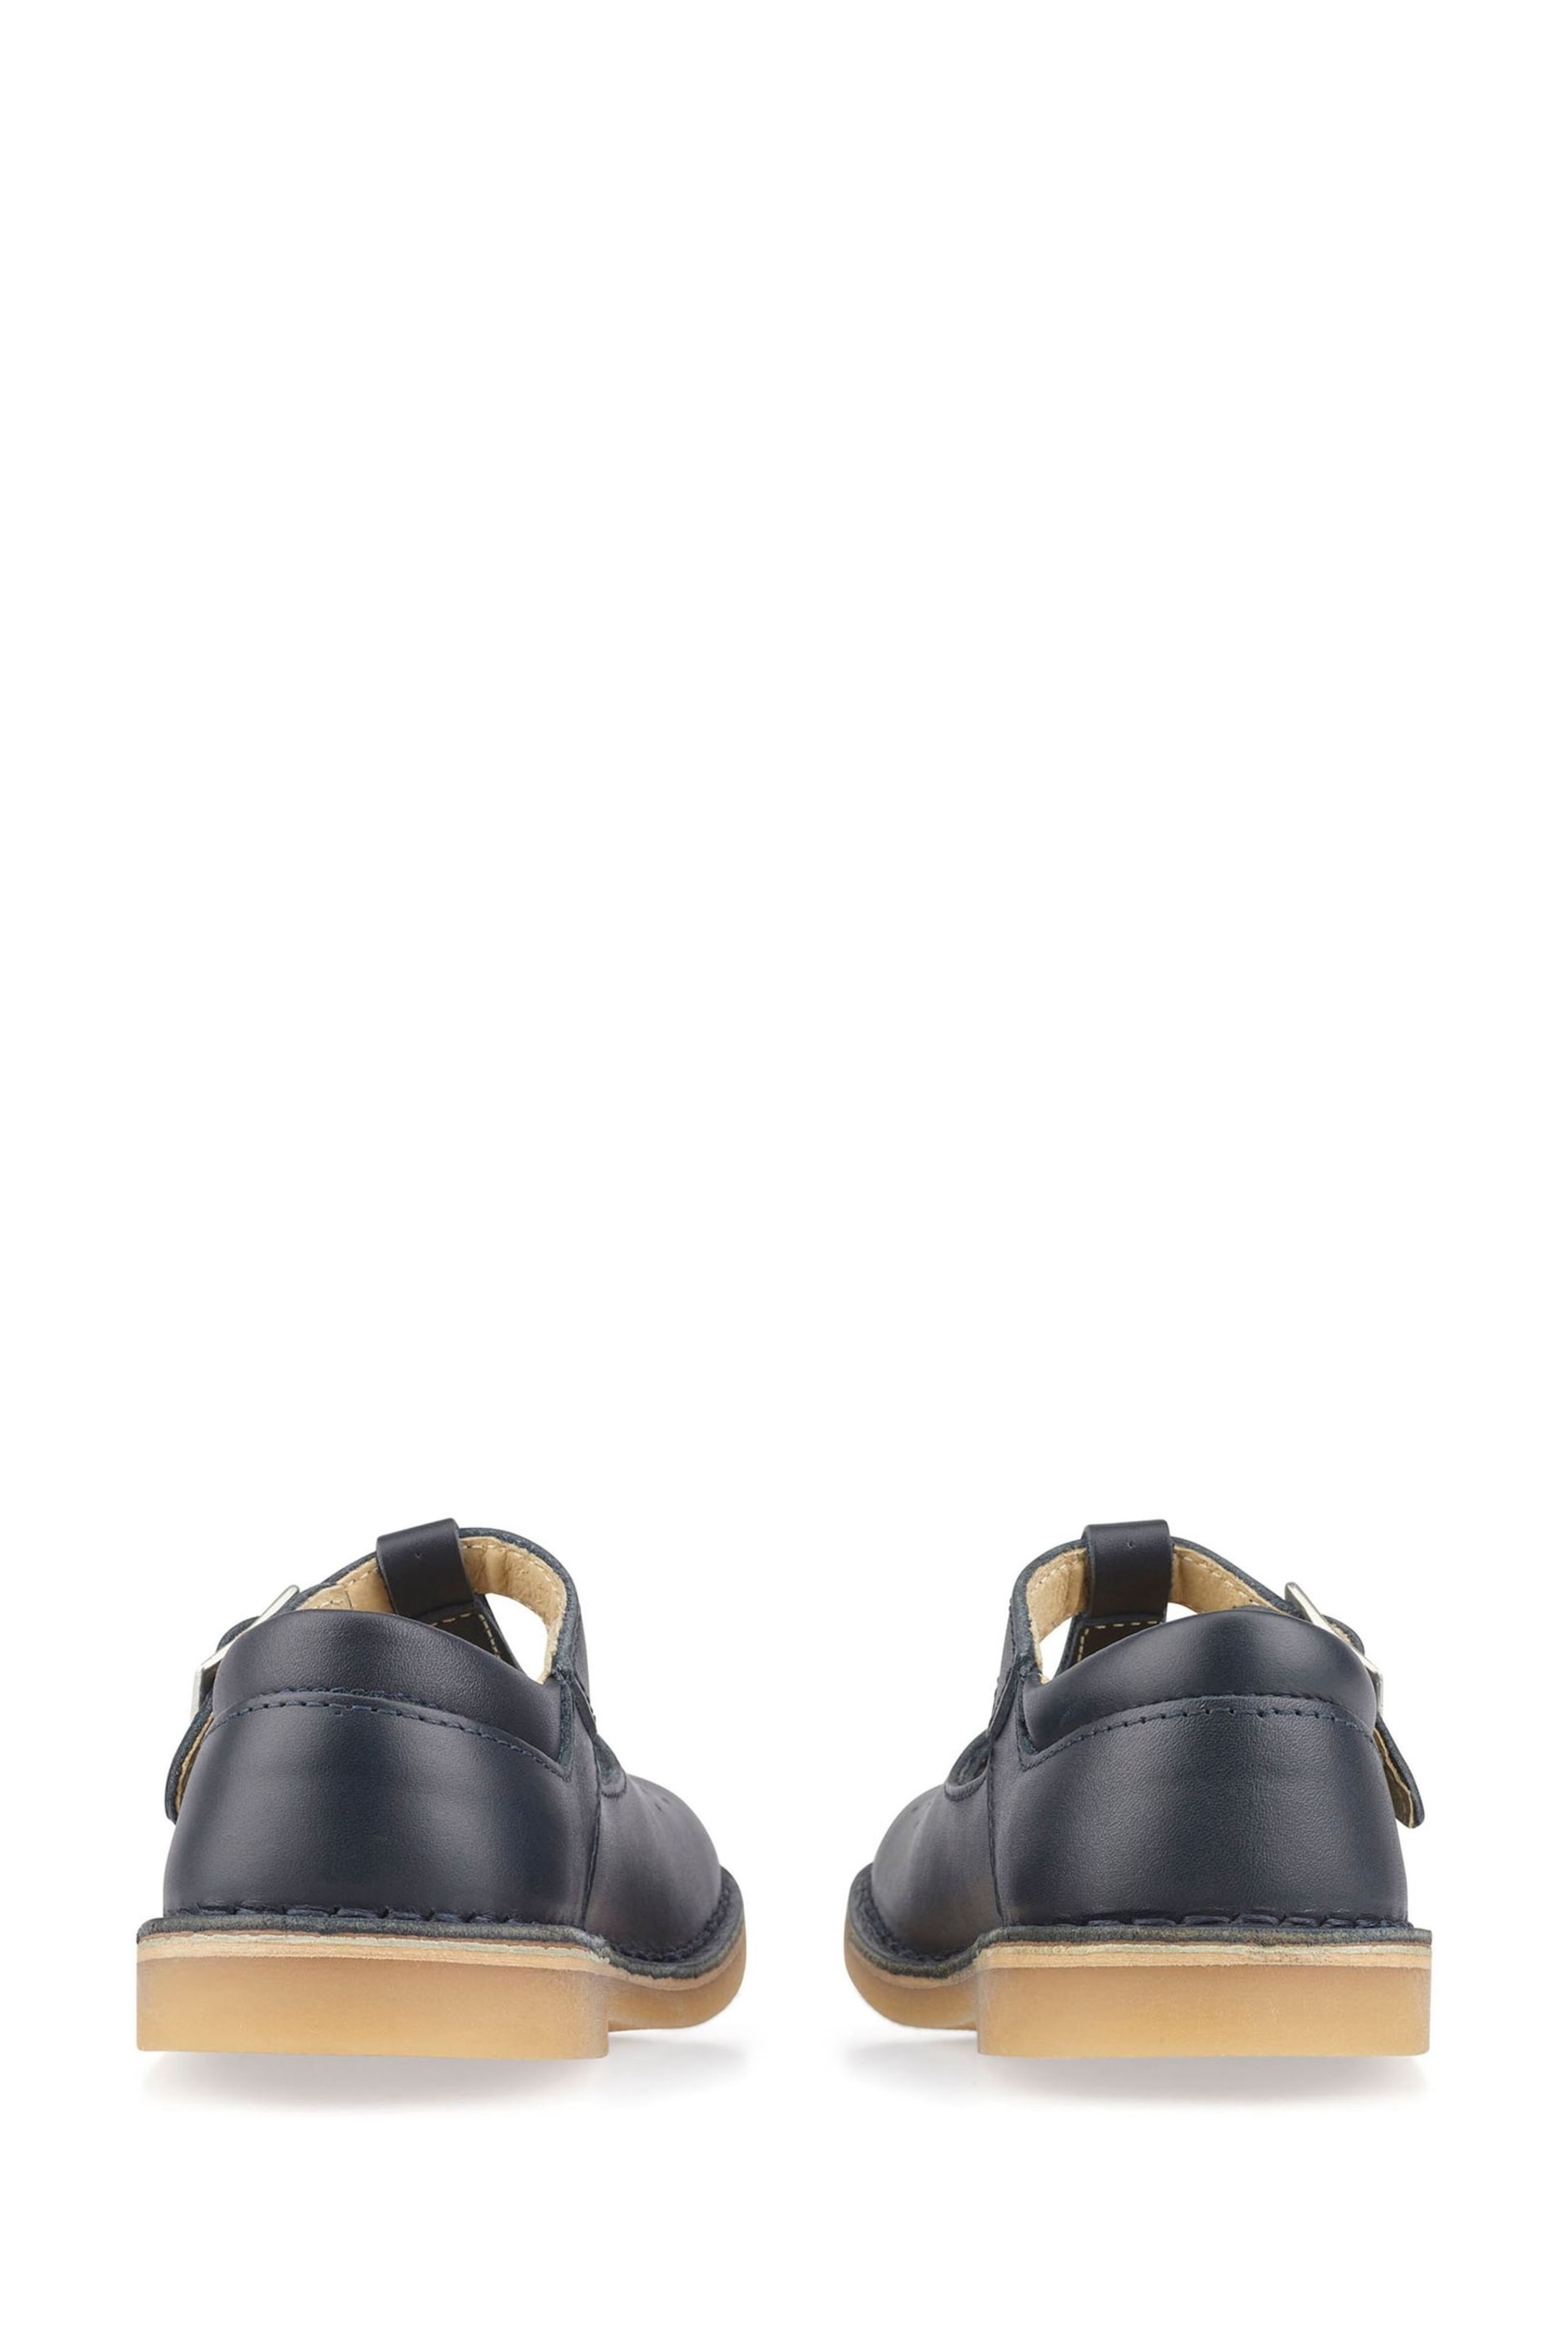 Start-Rite Lottie Navy Leather Classic T-Bar Shoes F Fit - Image 5 of 7